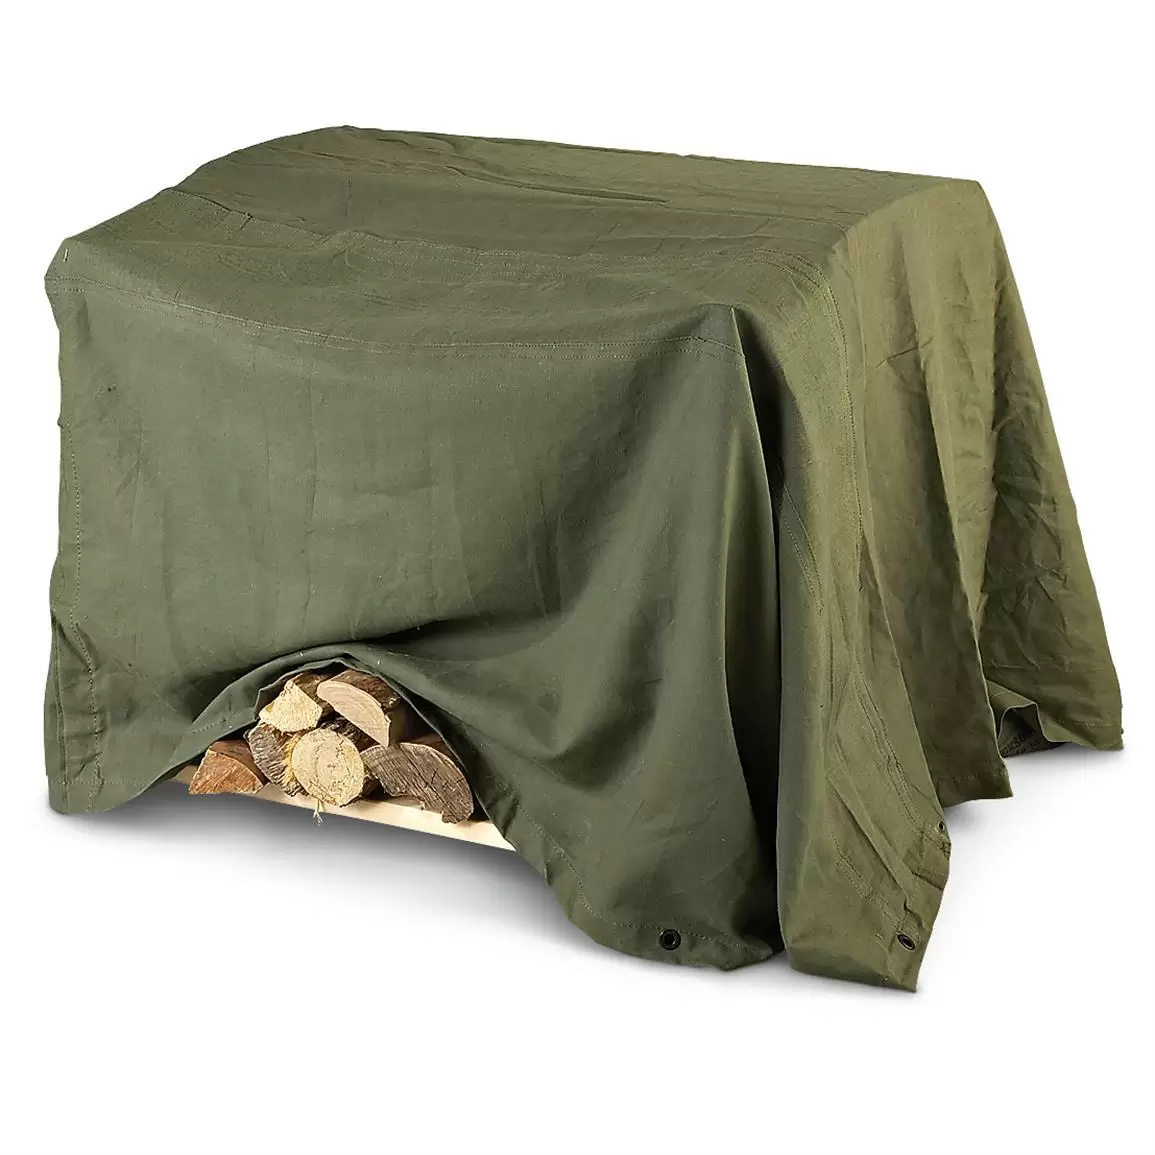 Fire Resistant Canvas Tarps and Covers